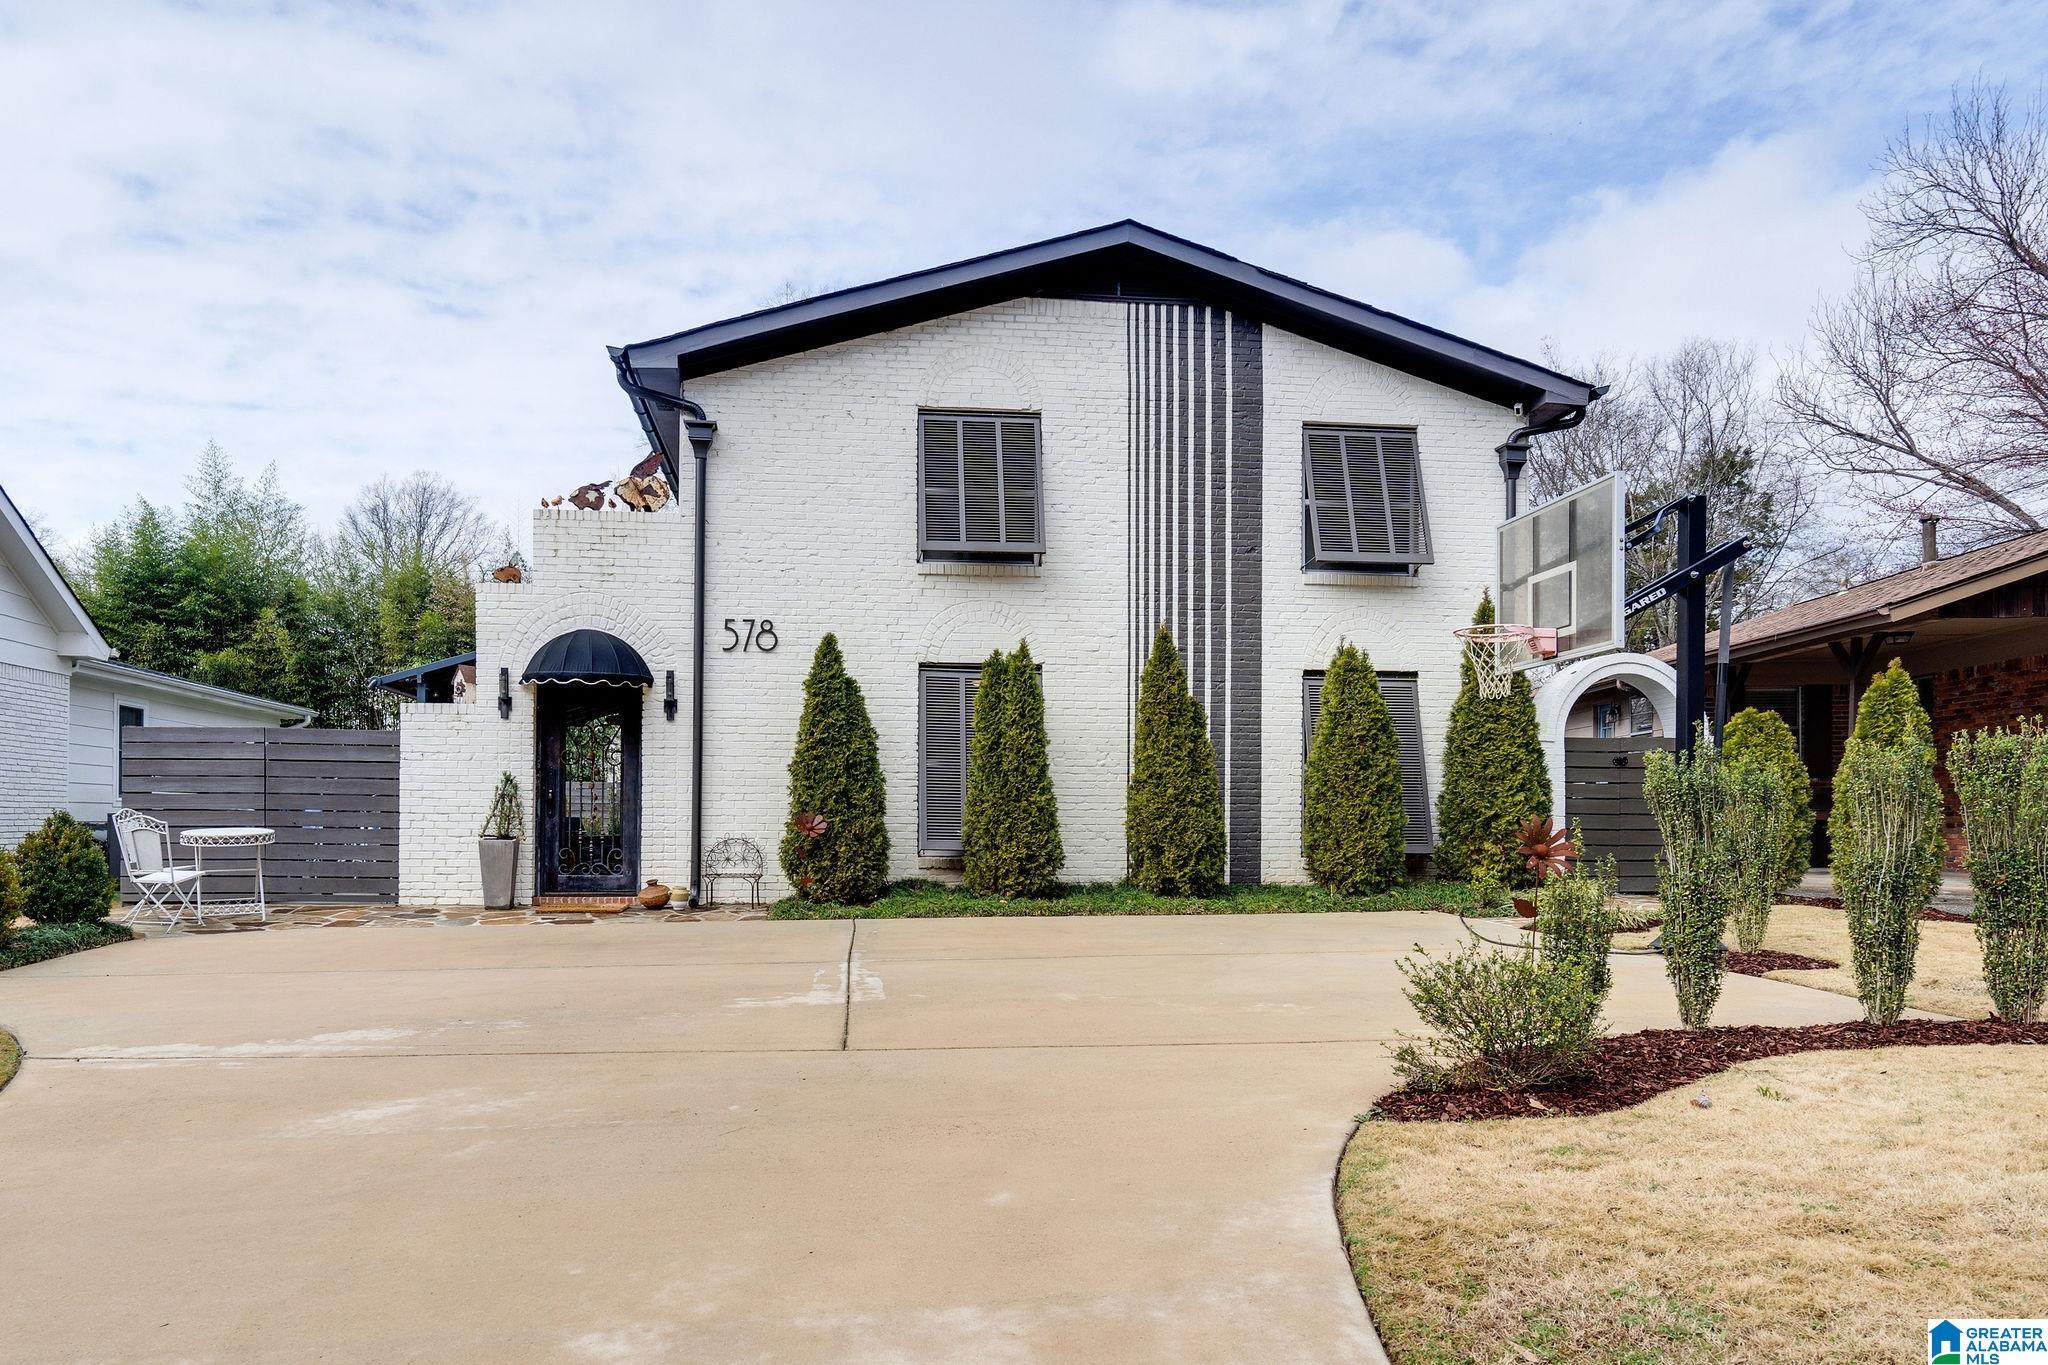 Photo Of 578 Forrest Drive Homewood